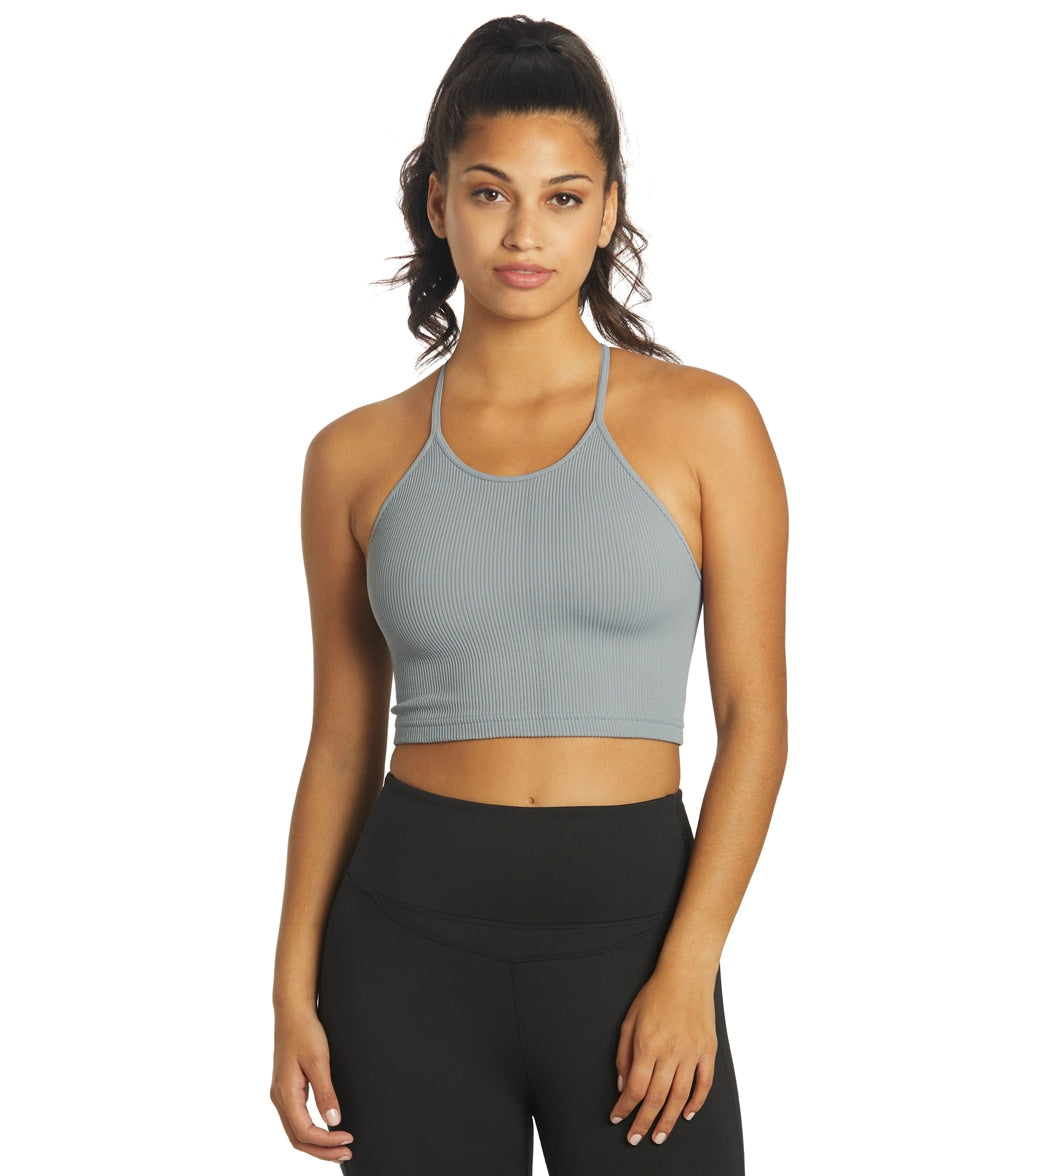 ZEESHY Yoga Tank Tops for Women Padded Sports Bra Workout Crop Tops Running  Yoga Tank Top Built in Bra Medium Support with Removable